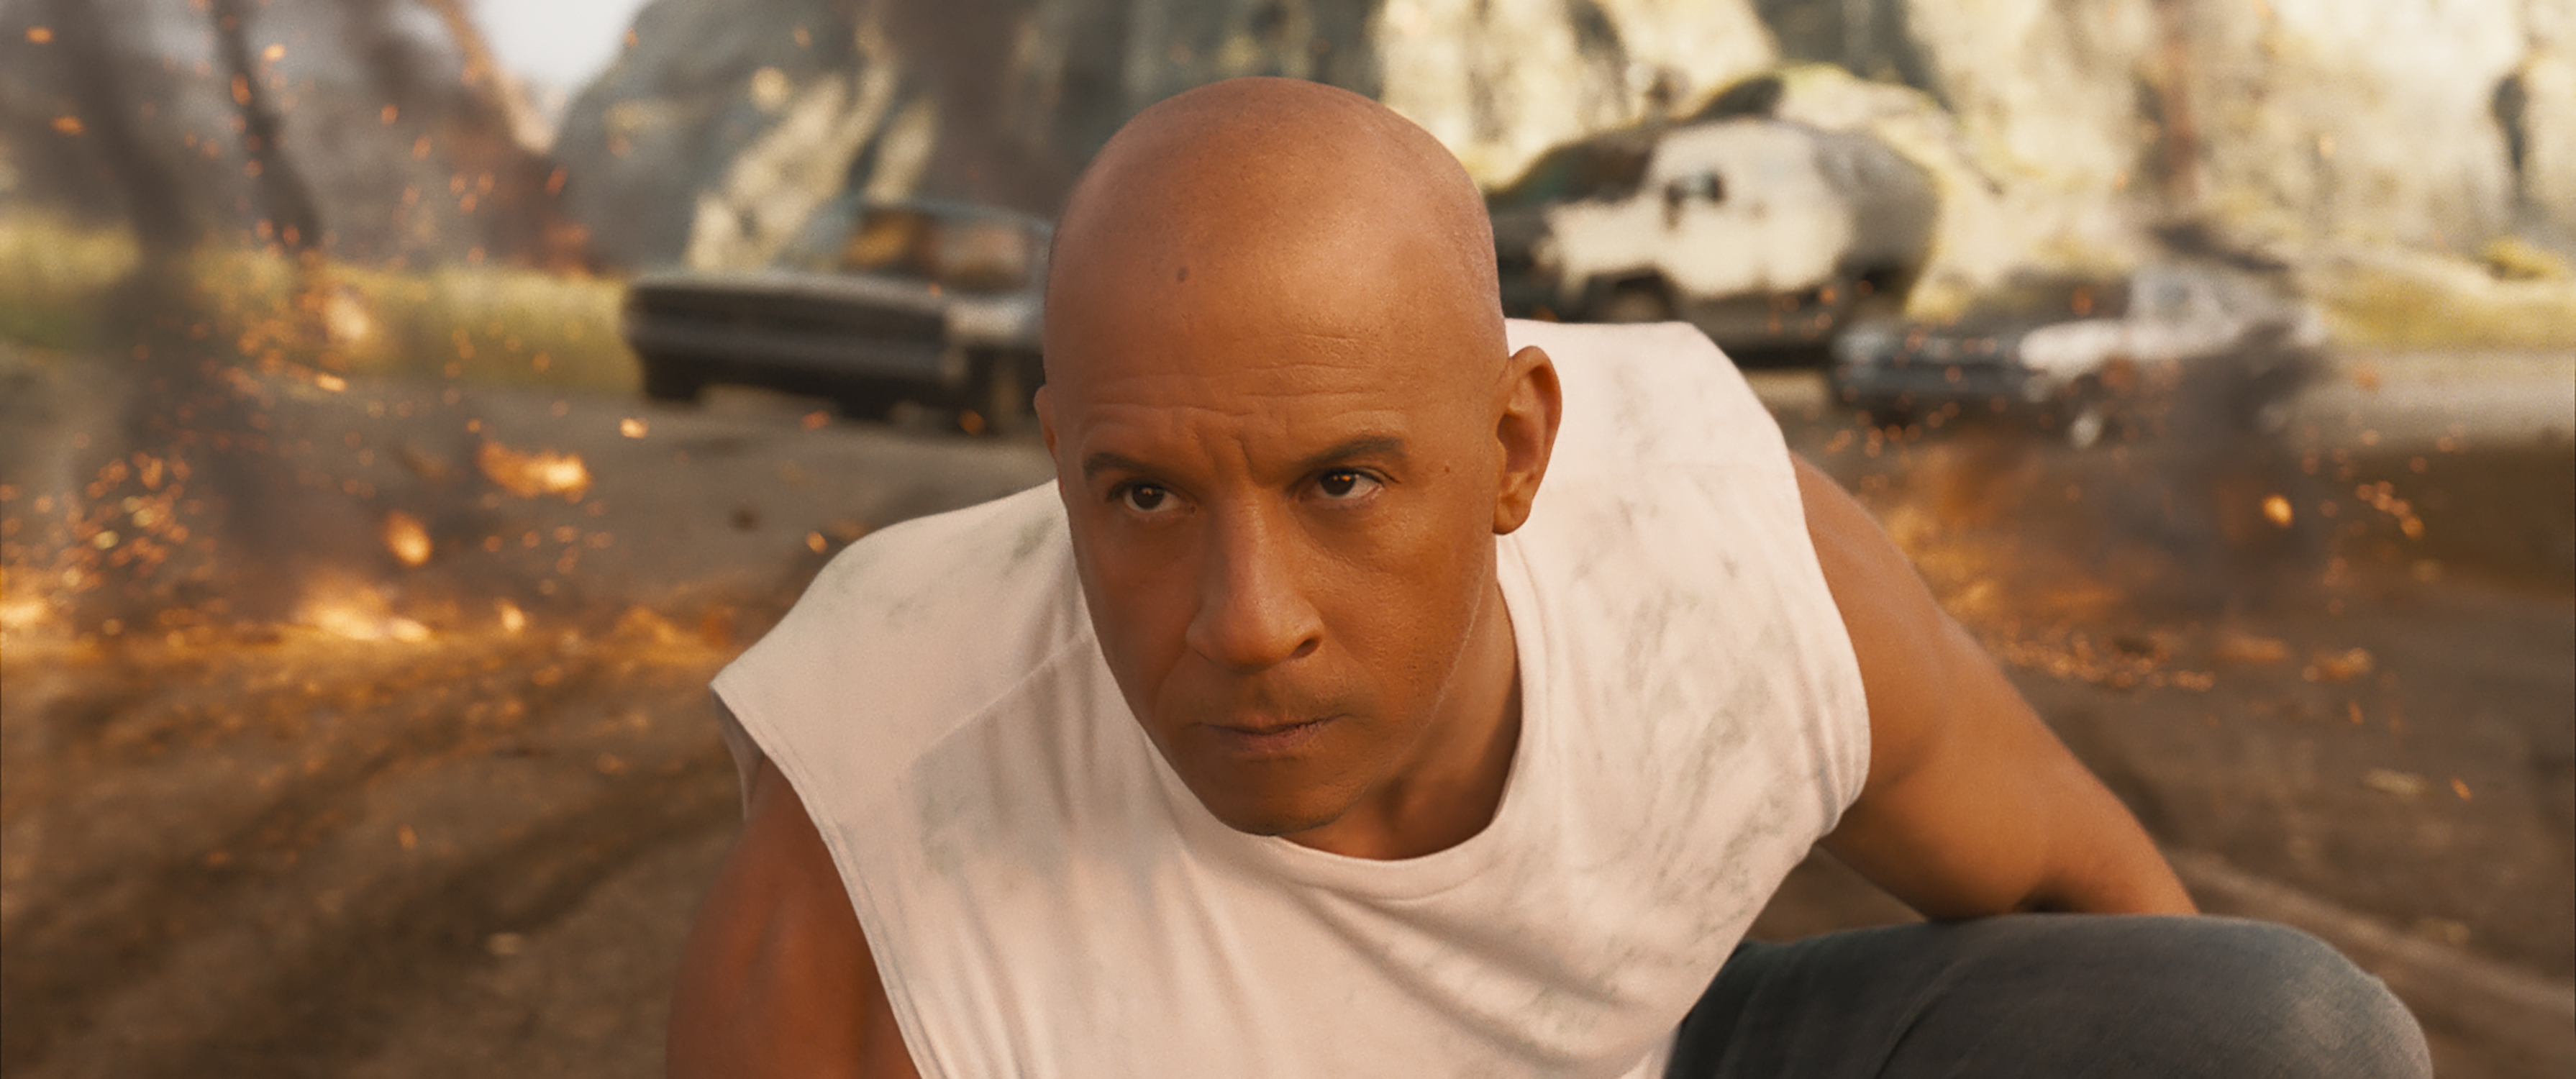 F9: Vin Diesel crouches and stars menacingly